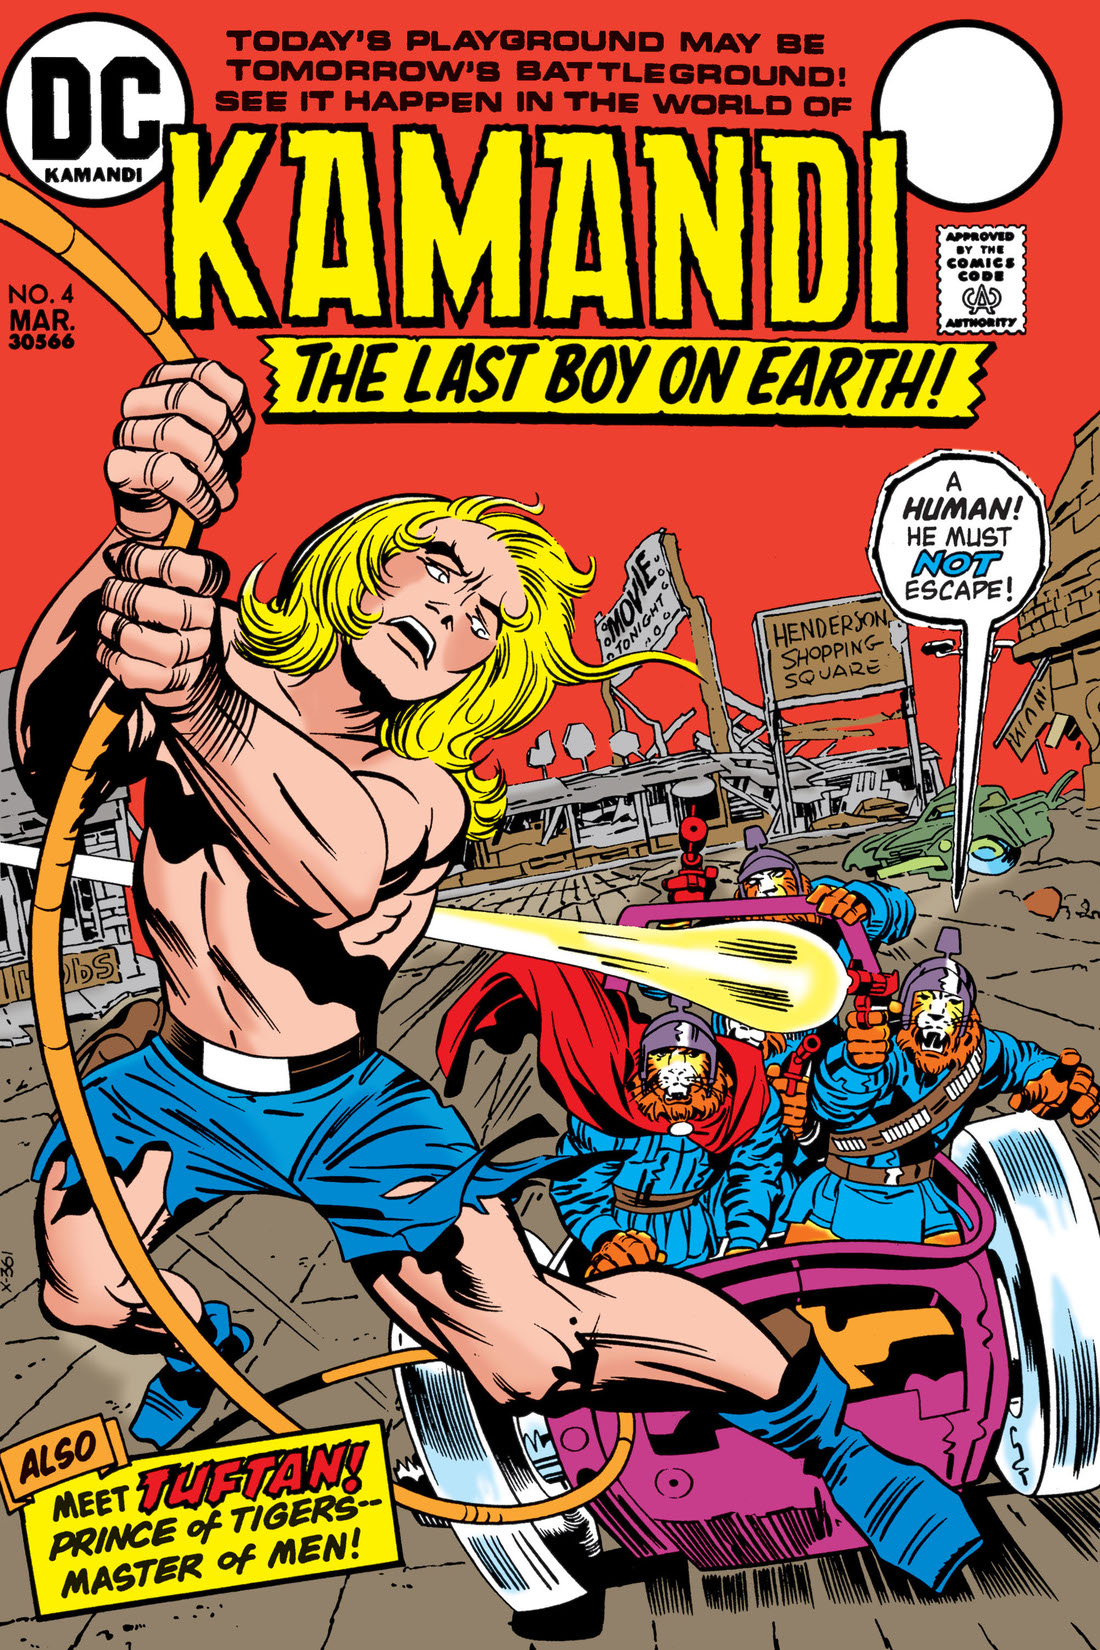 Kamandi: The Last Boy on Earth #4 preview images